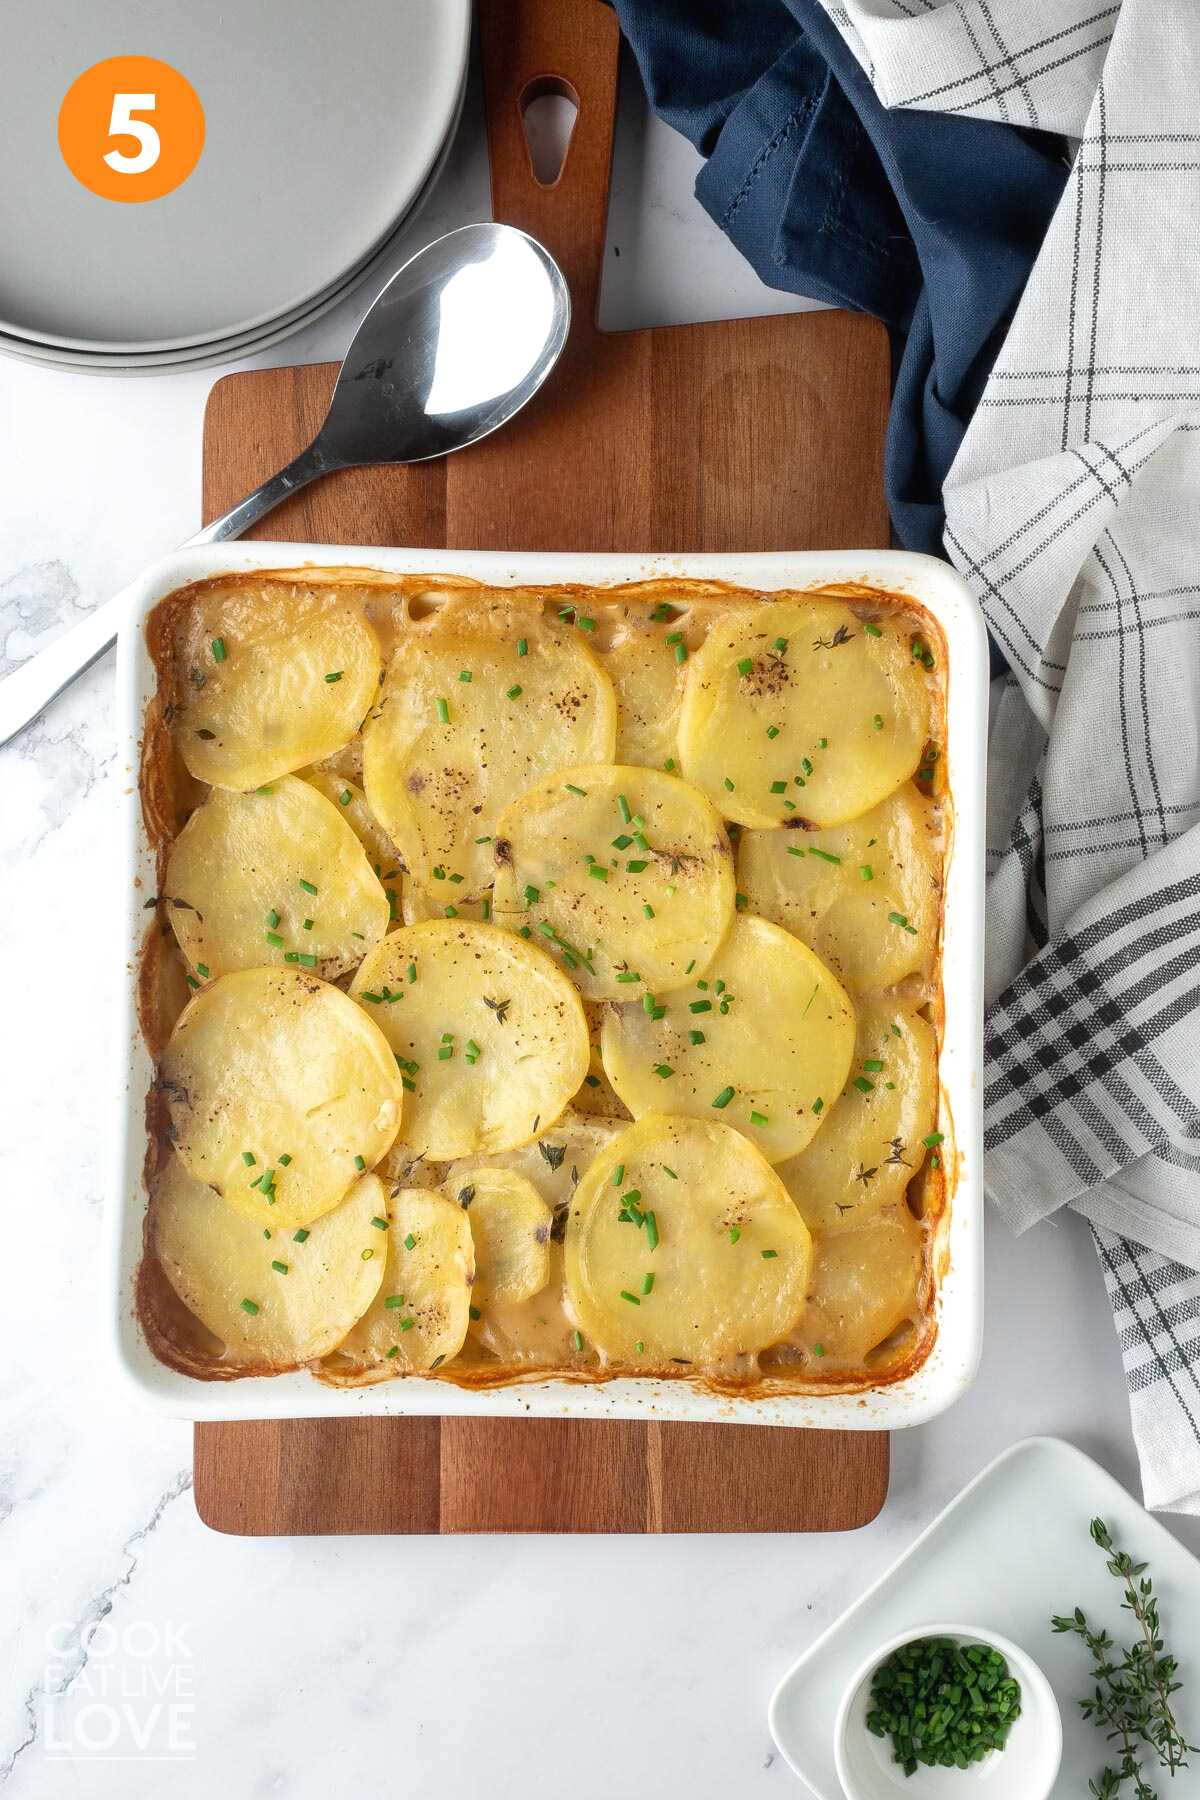 A dish of baked vegan scalloped potatoes on the table.